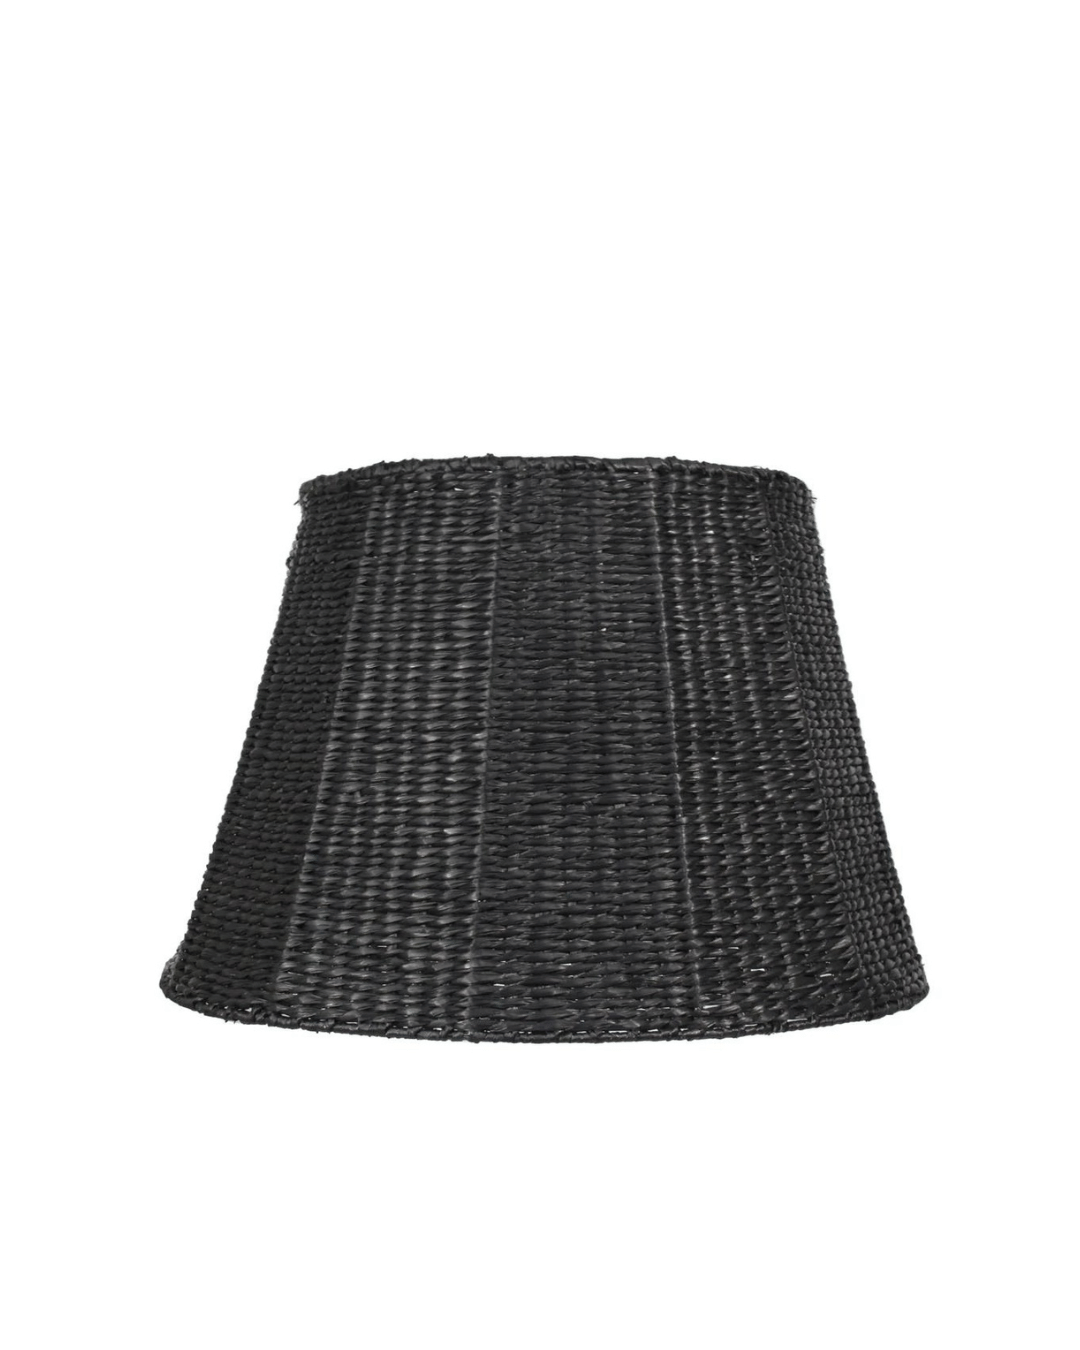 Black Seagrass Lampshade 16" in Arizona bungalow style, with a flared cylindrical shape, isolated on a white background by Maison Maison Design.